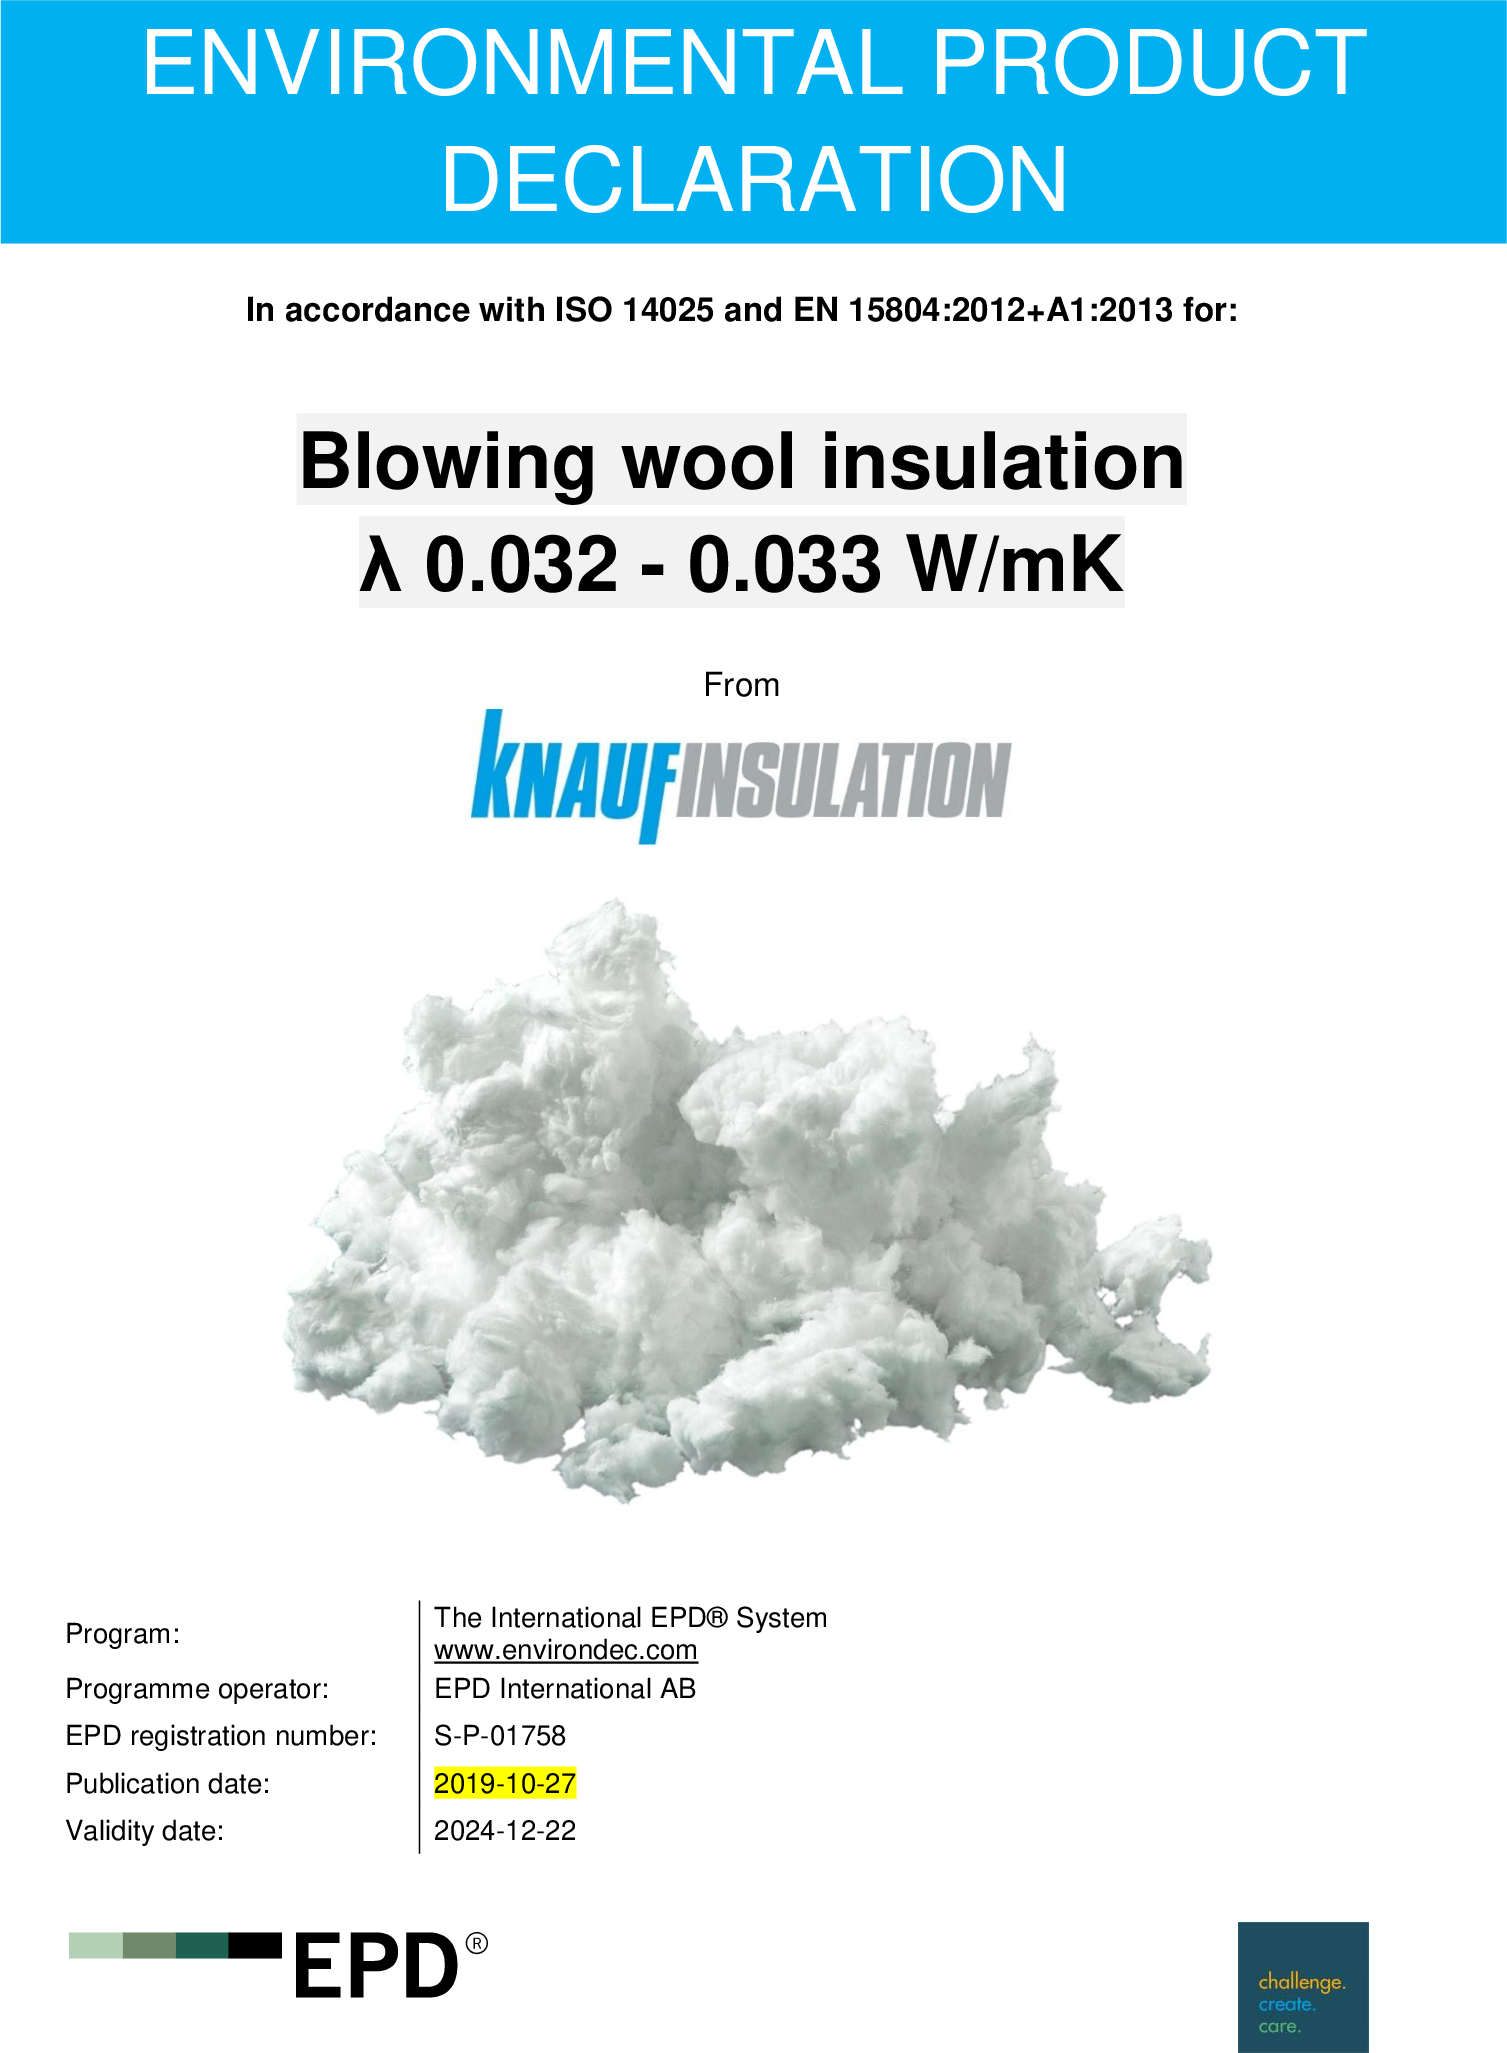 Environment Product Declaration (EPD) - Blowing Wool Insulation 0.032 - 0.033 W/mK